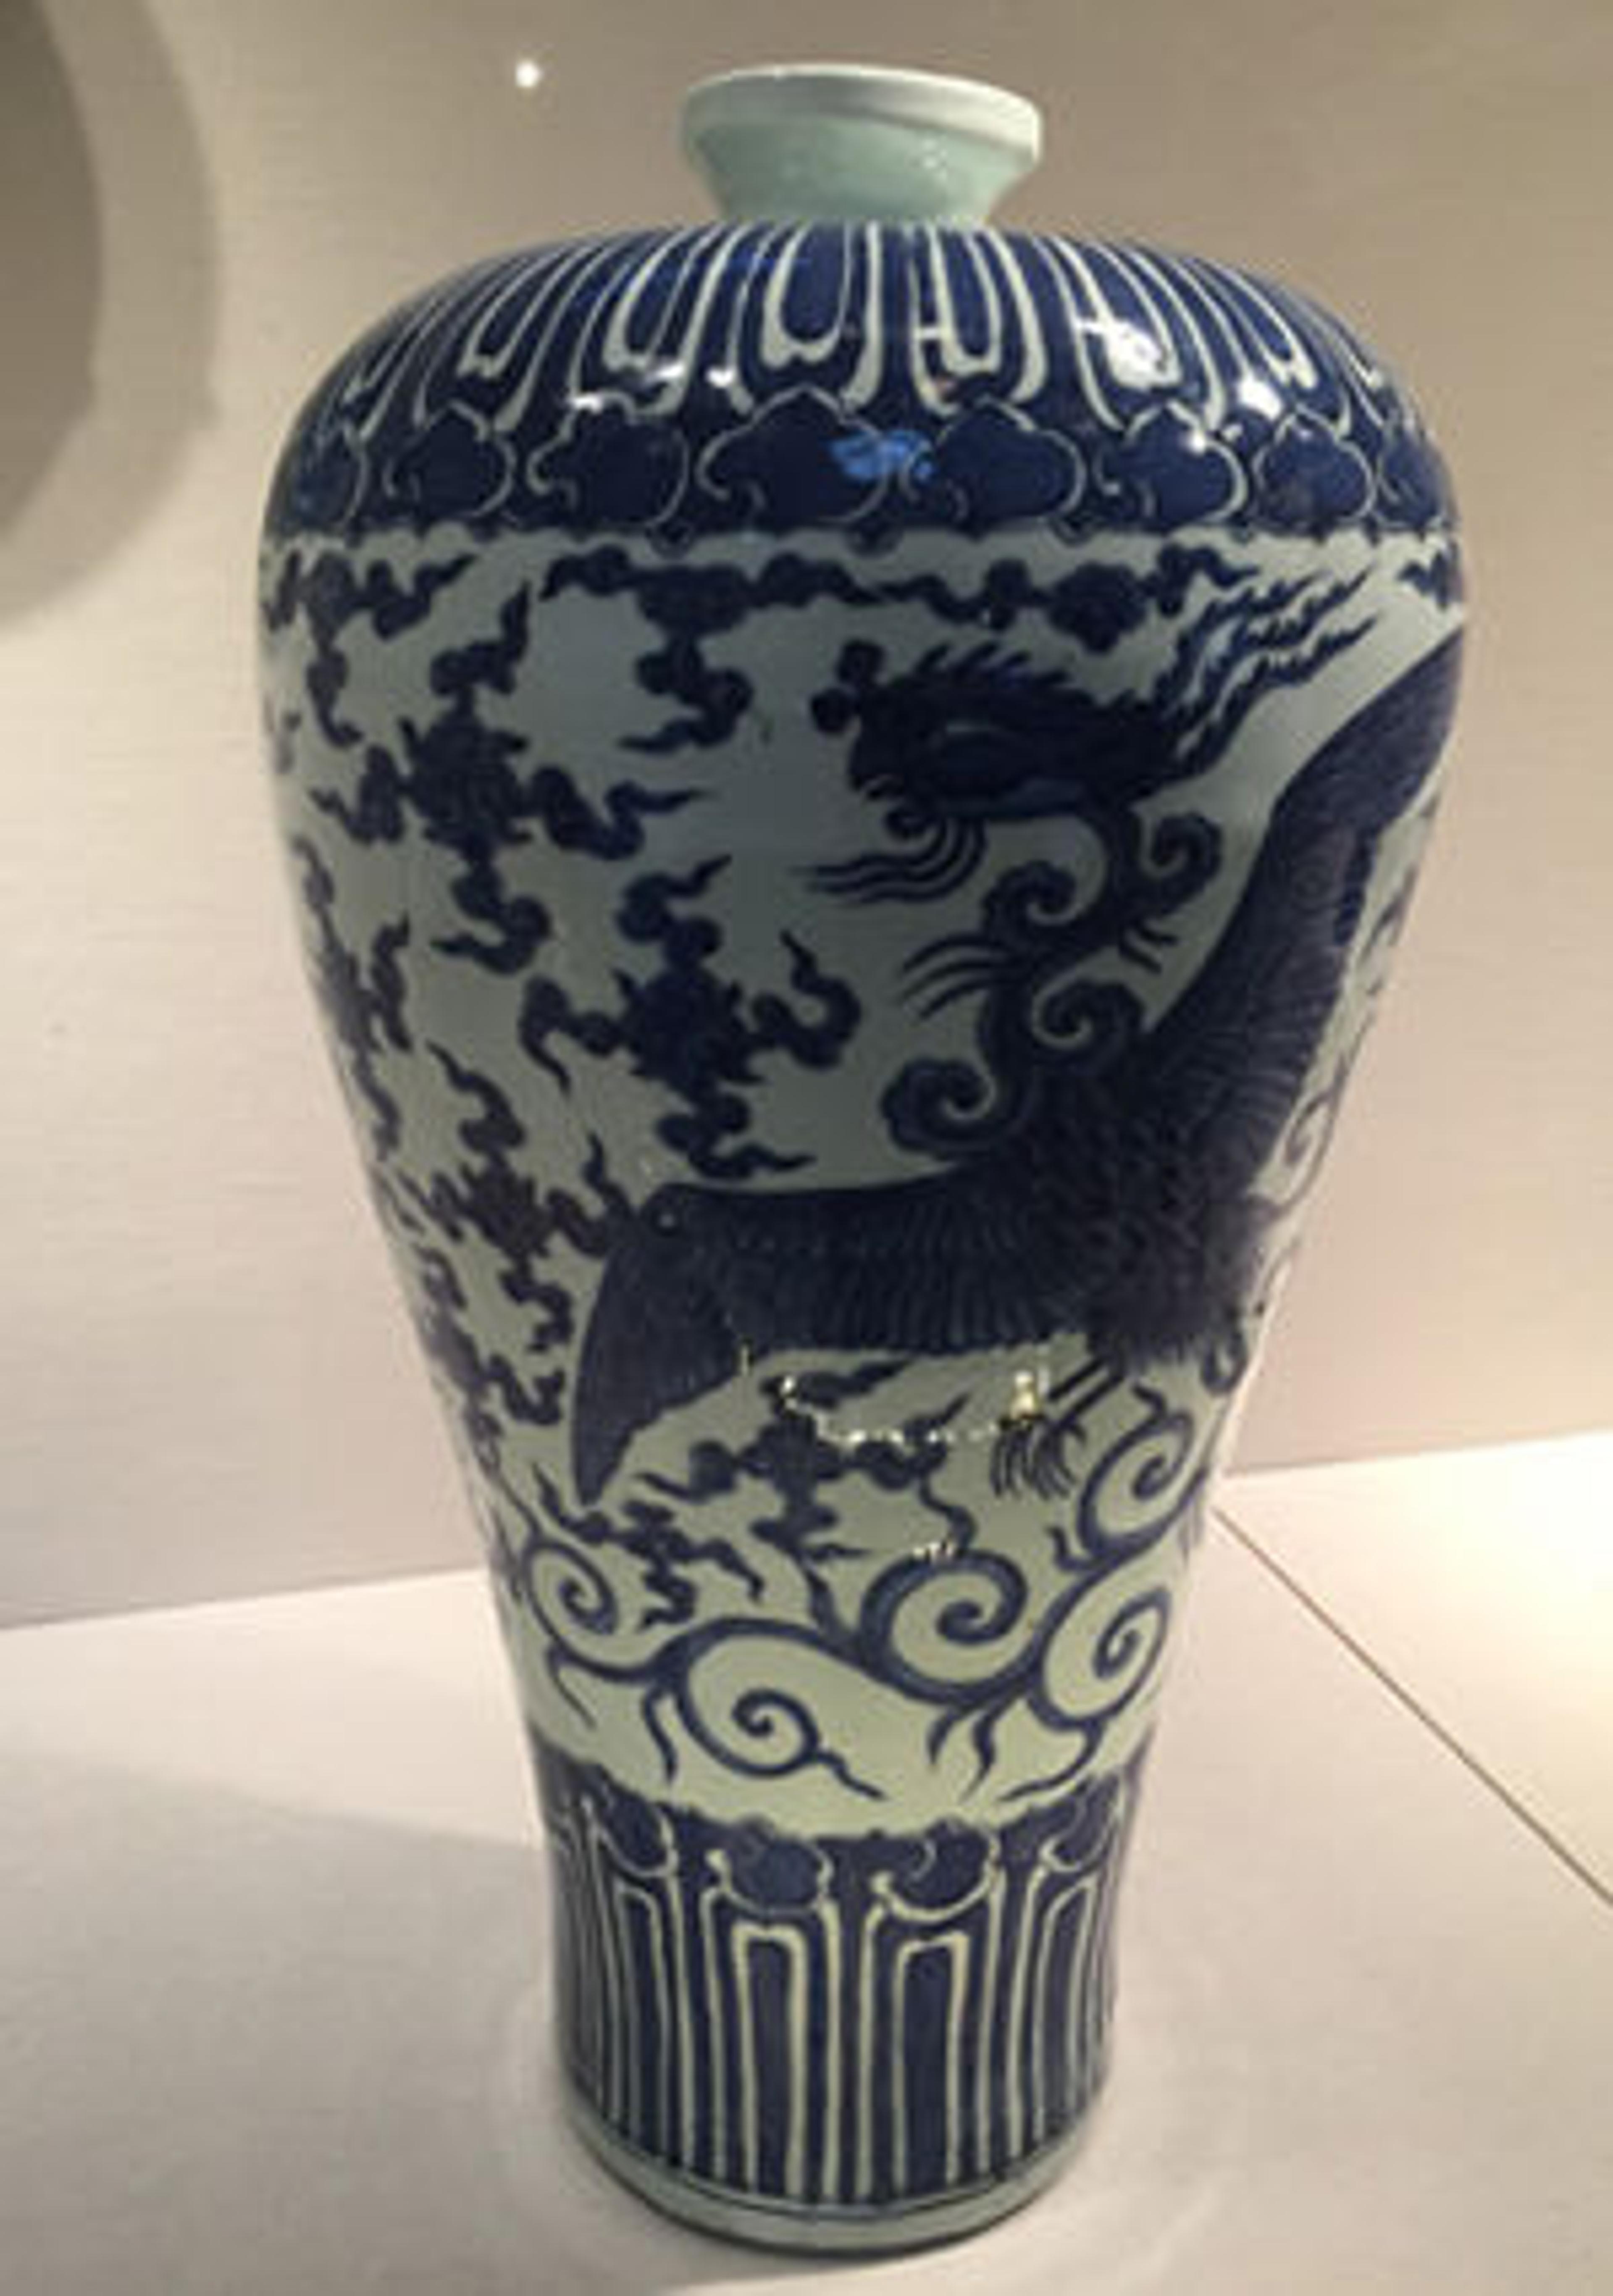 A porcelain vase from China's Ming dynasty